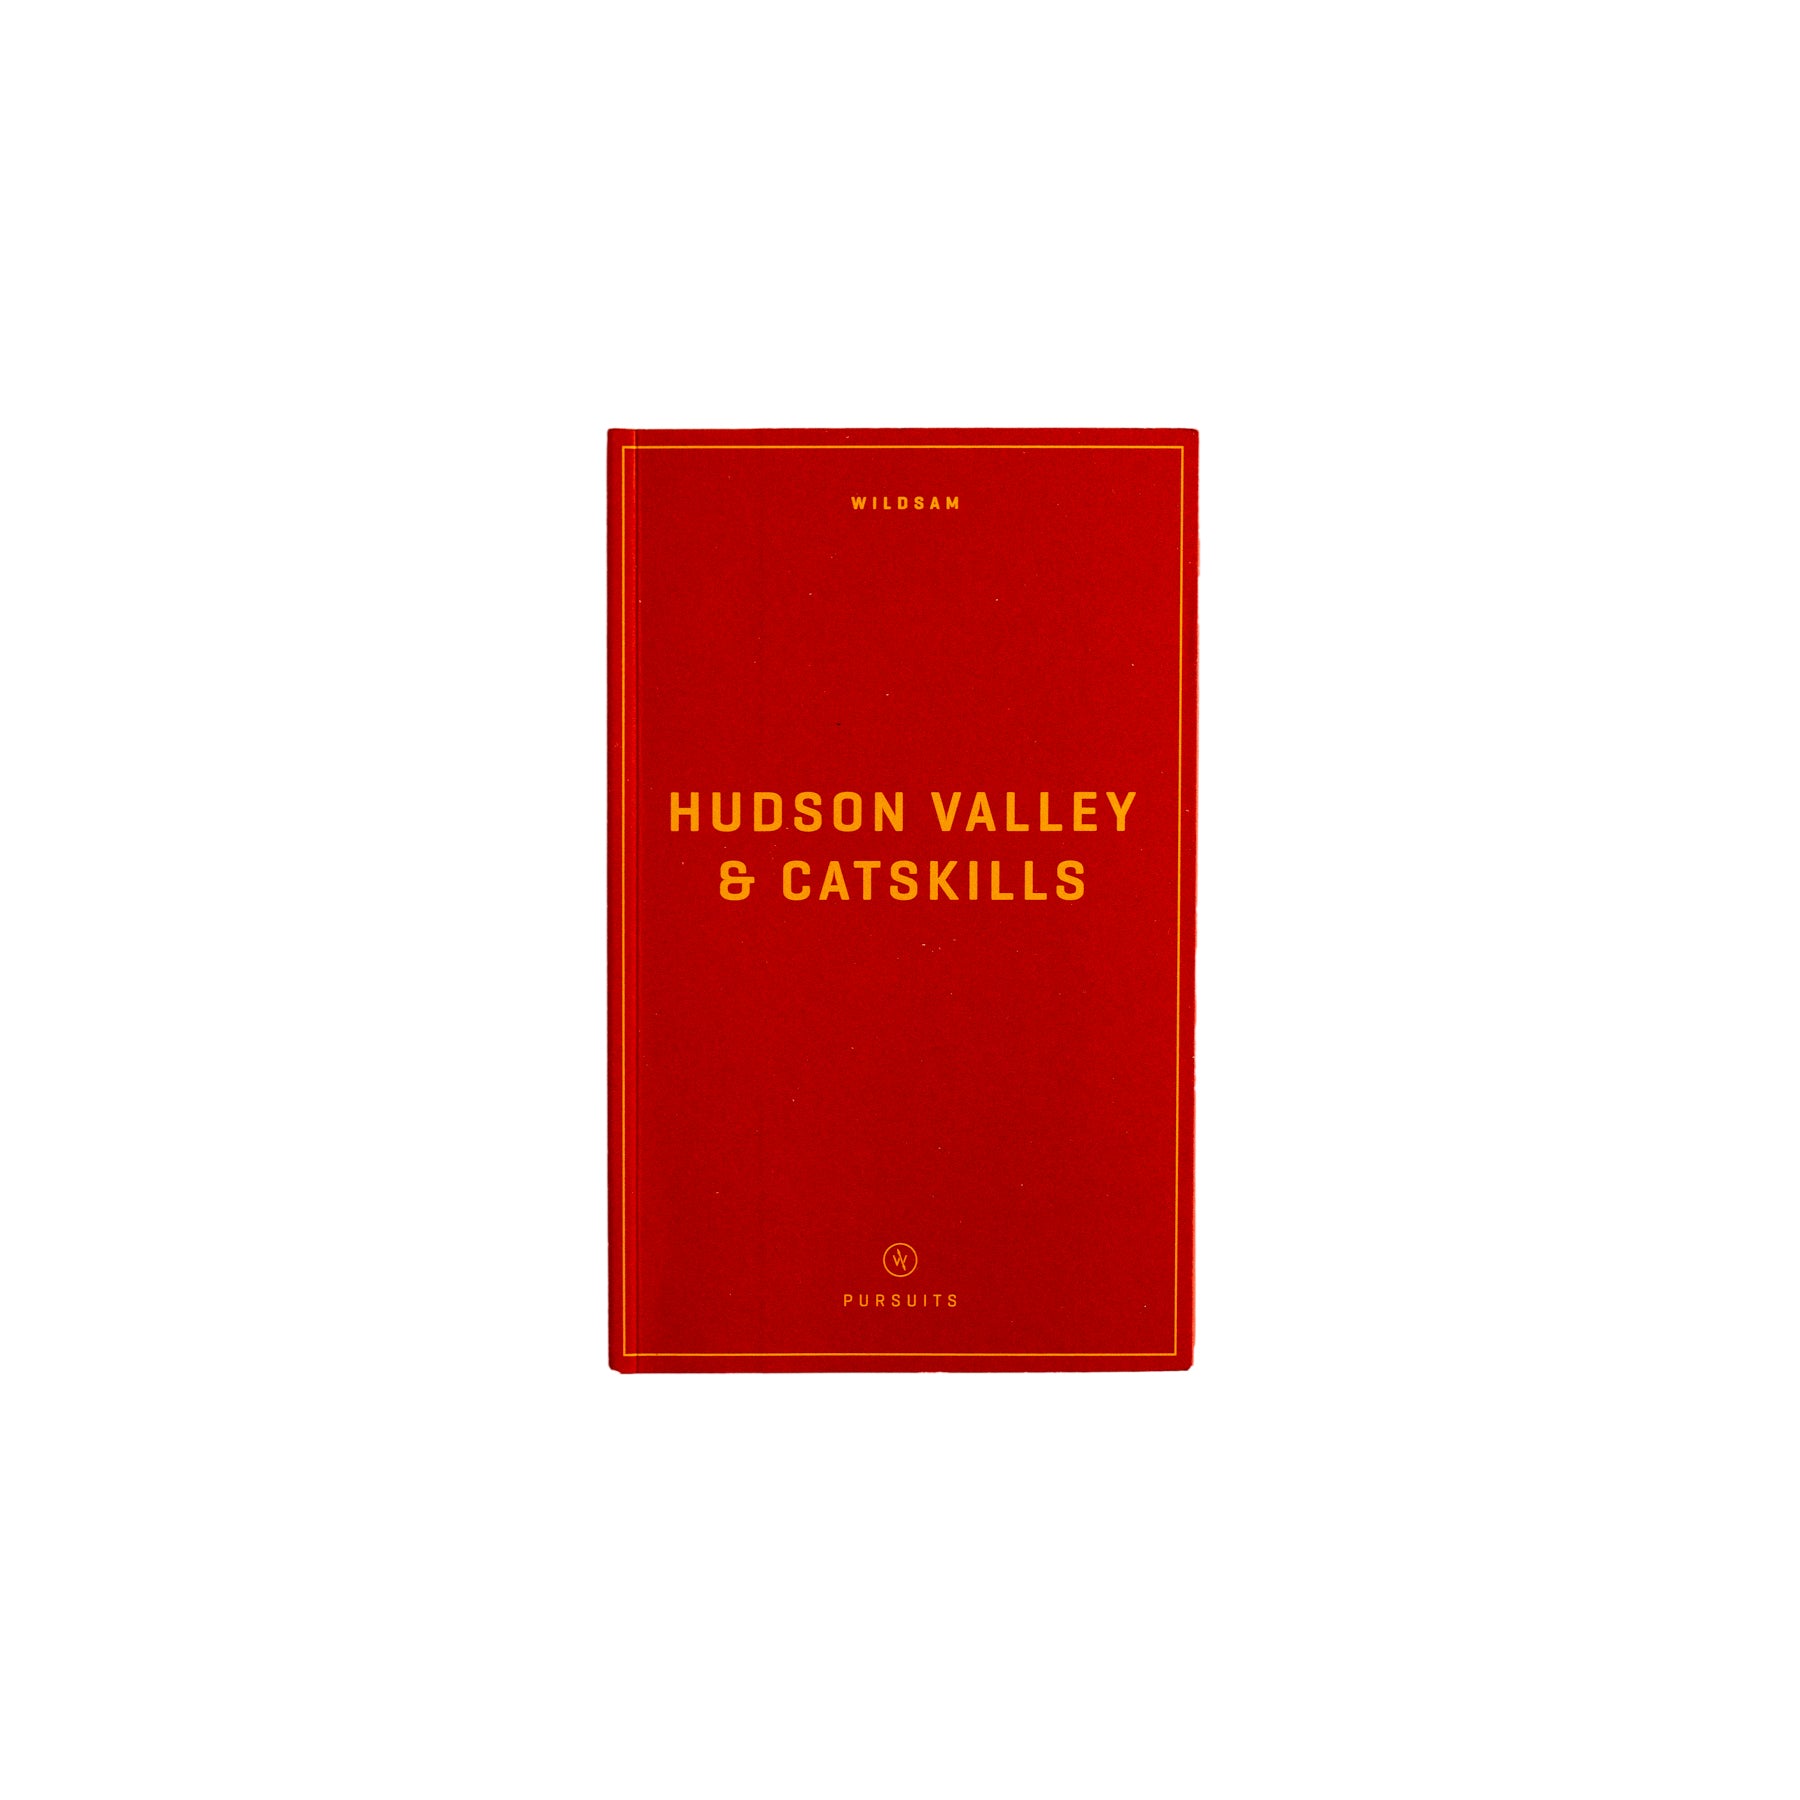 Hudson Valley and Catskills Guide Book by Wildsam